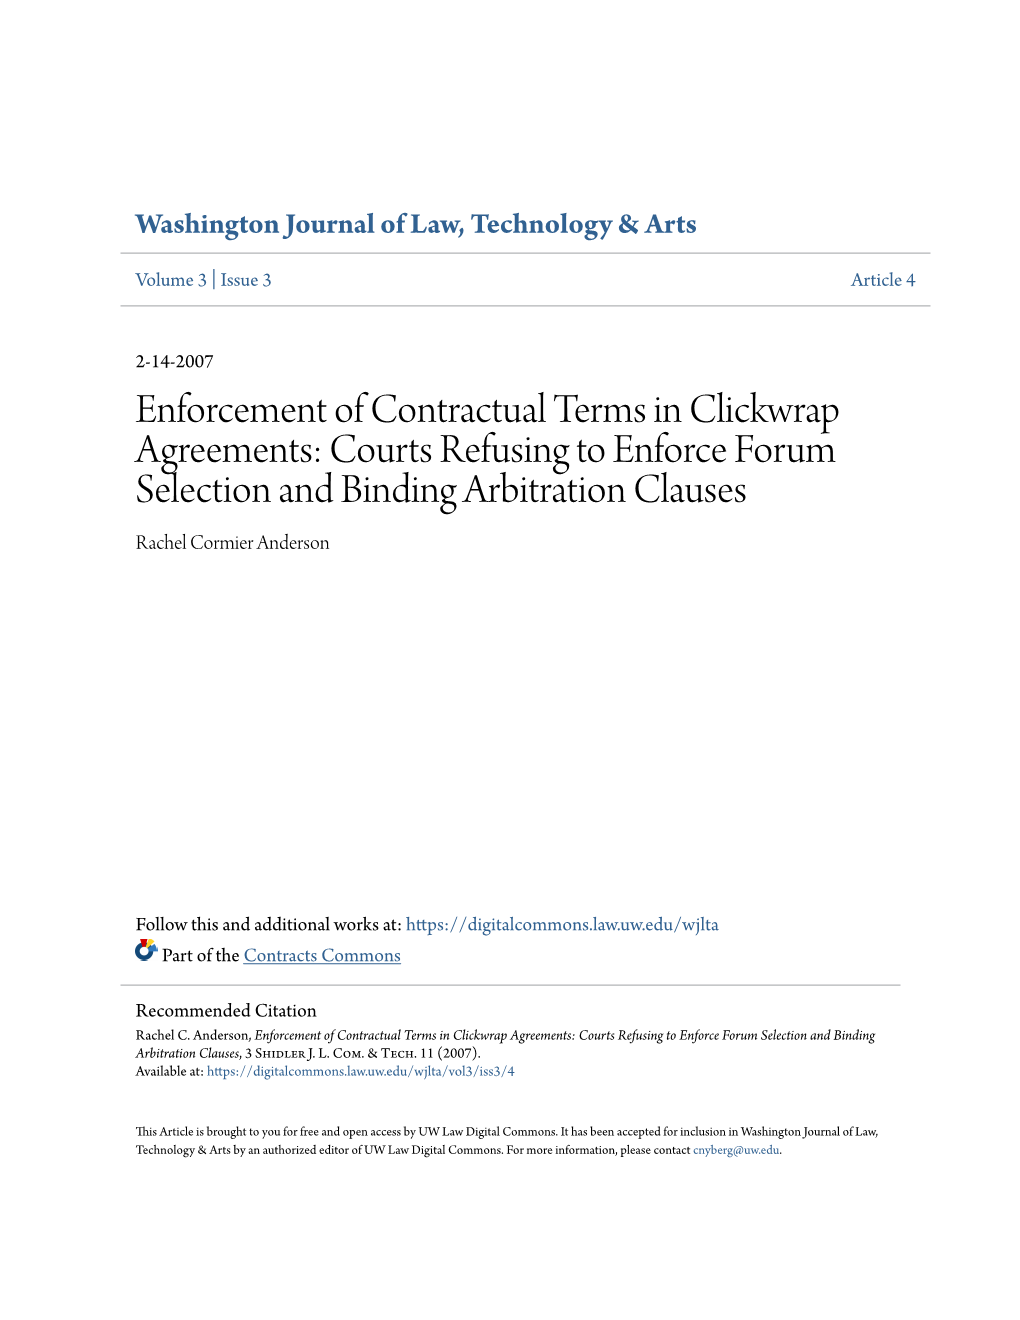 Enforcement of Contractual Terms in Clickwrap Agreements: Courts Refusing to Enforce Forum Selection and Binding Arbitration Clauses Rachel Cormier Anderson